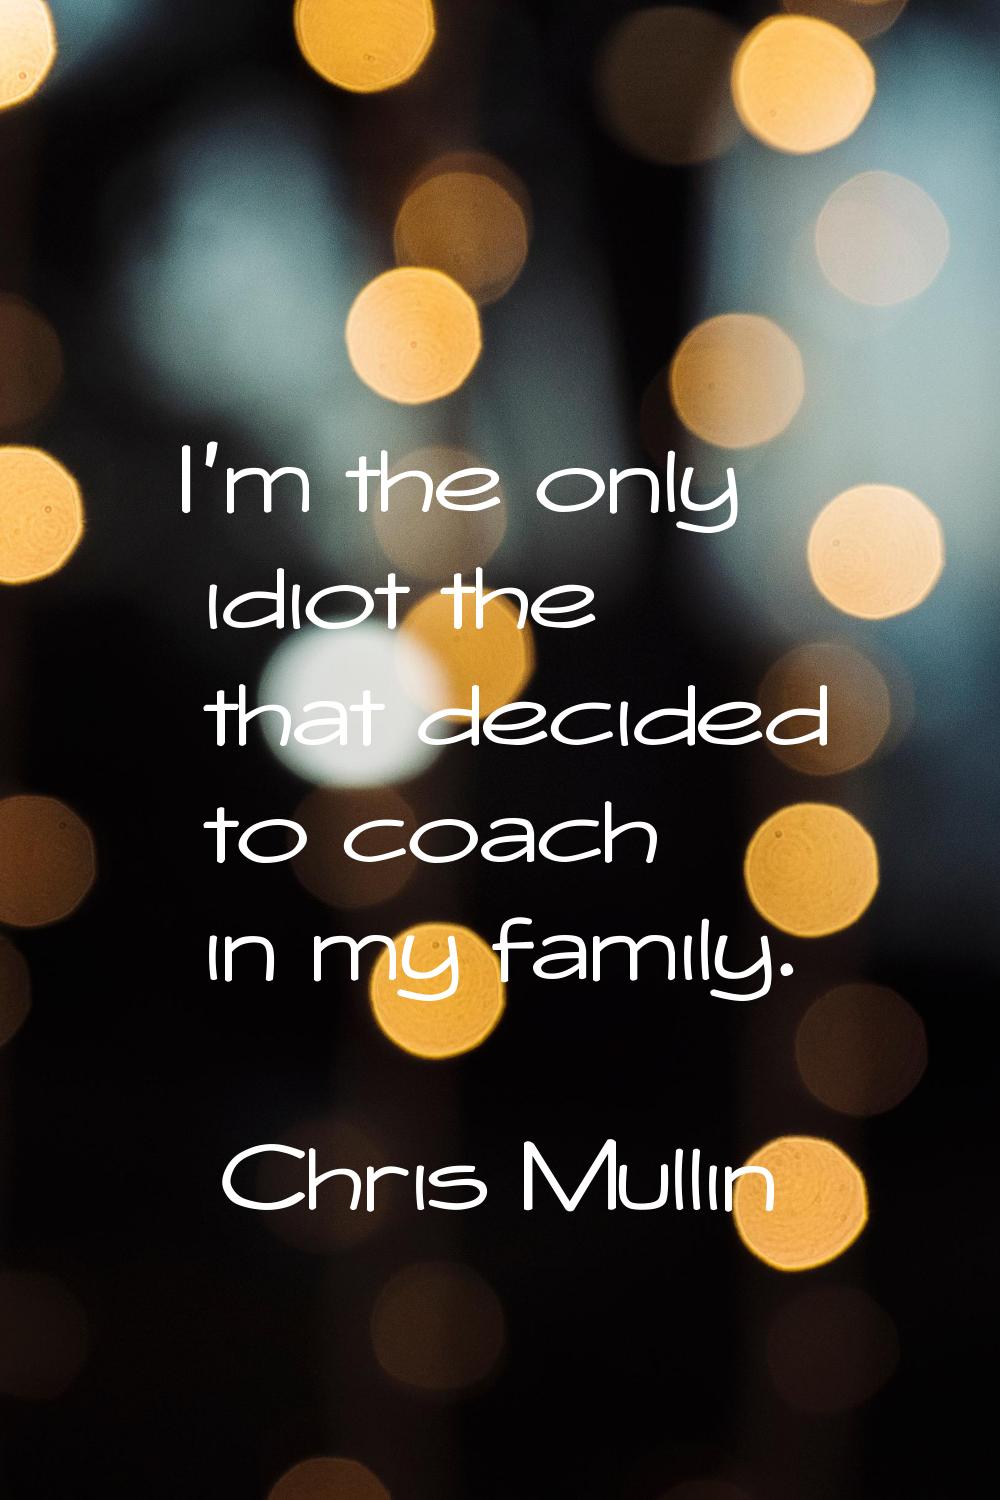 I'm the only idiot the that decided to coach in my family.